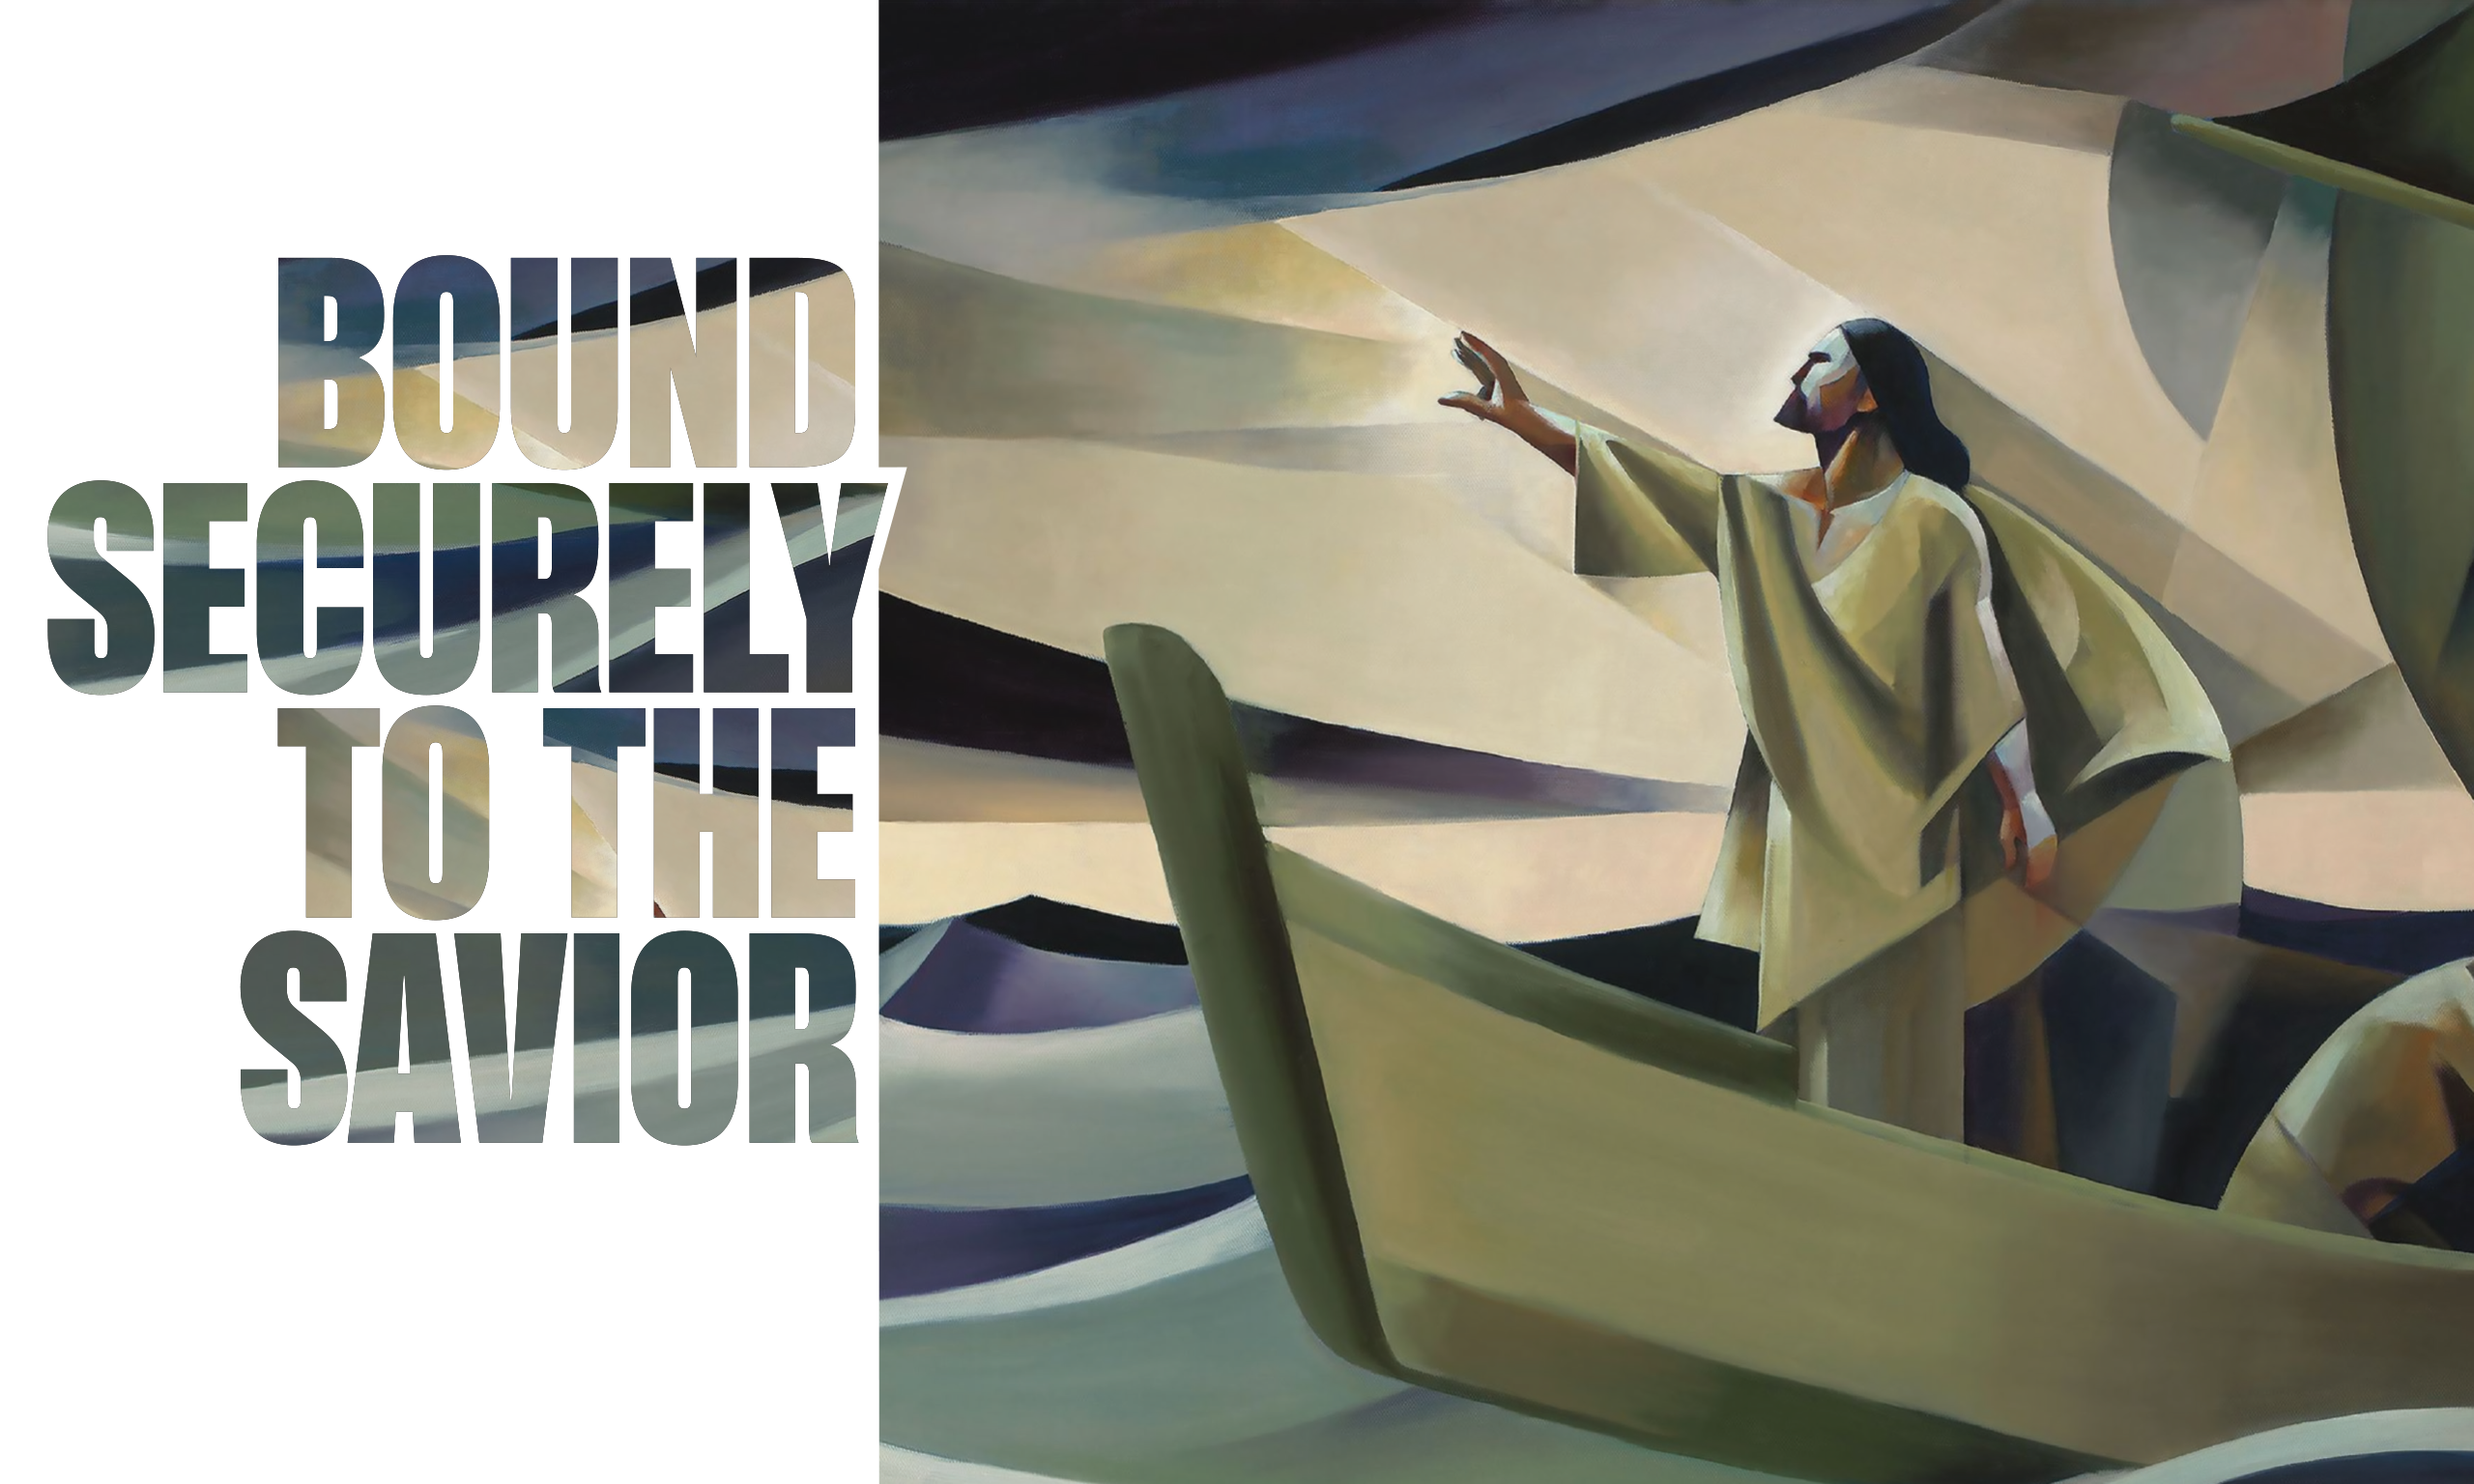 "Bound Securely to the Savior" with a painting of the Savior in a ship calming the sea